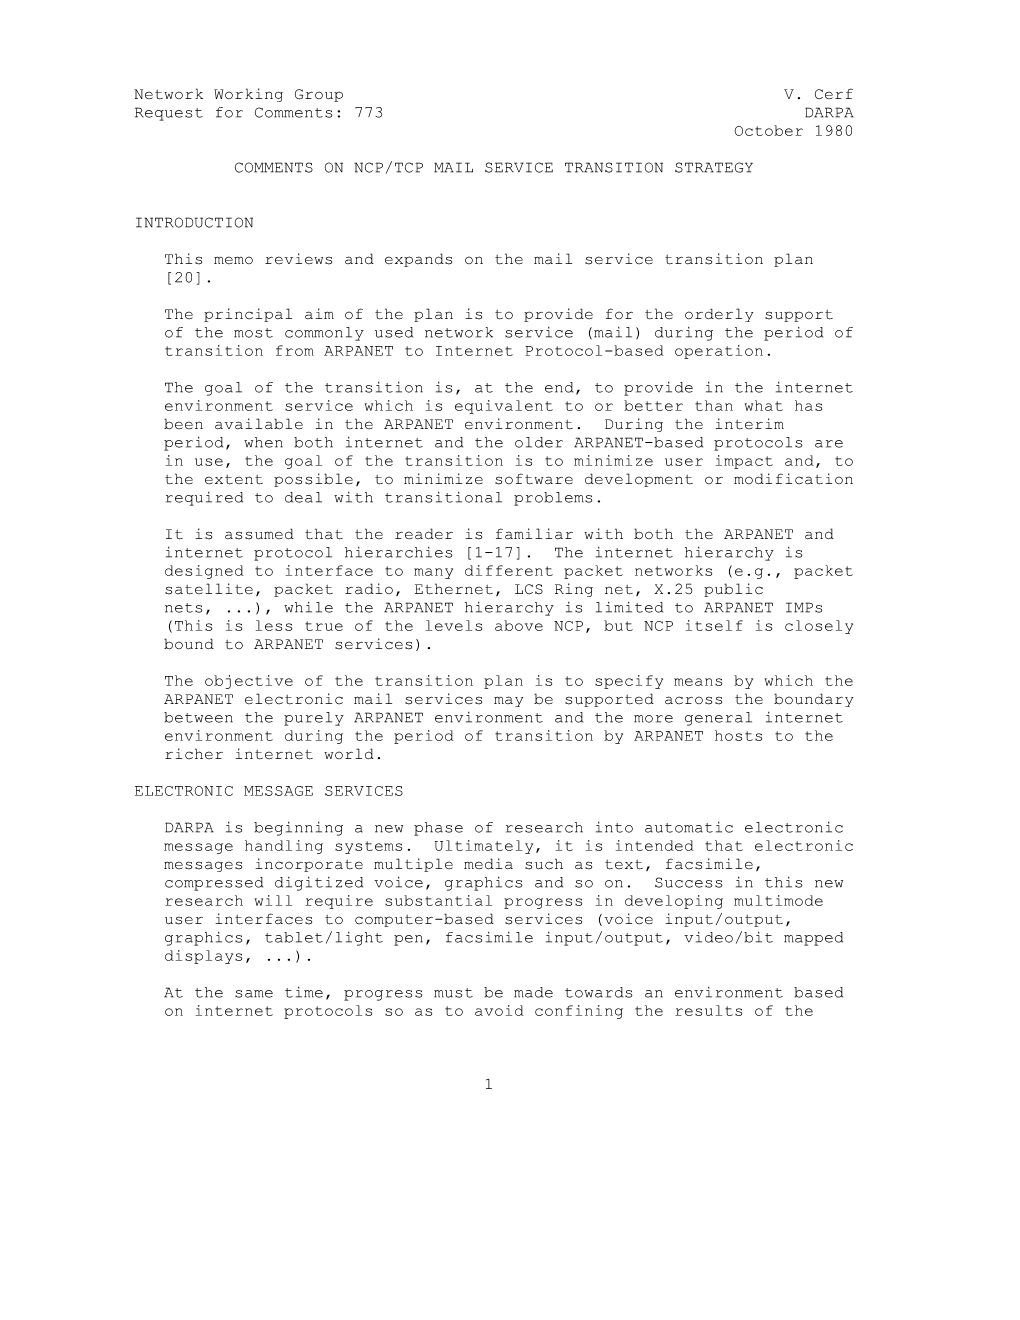 773 DARPA October 1980 COMMENTS on NCP/TCP